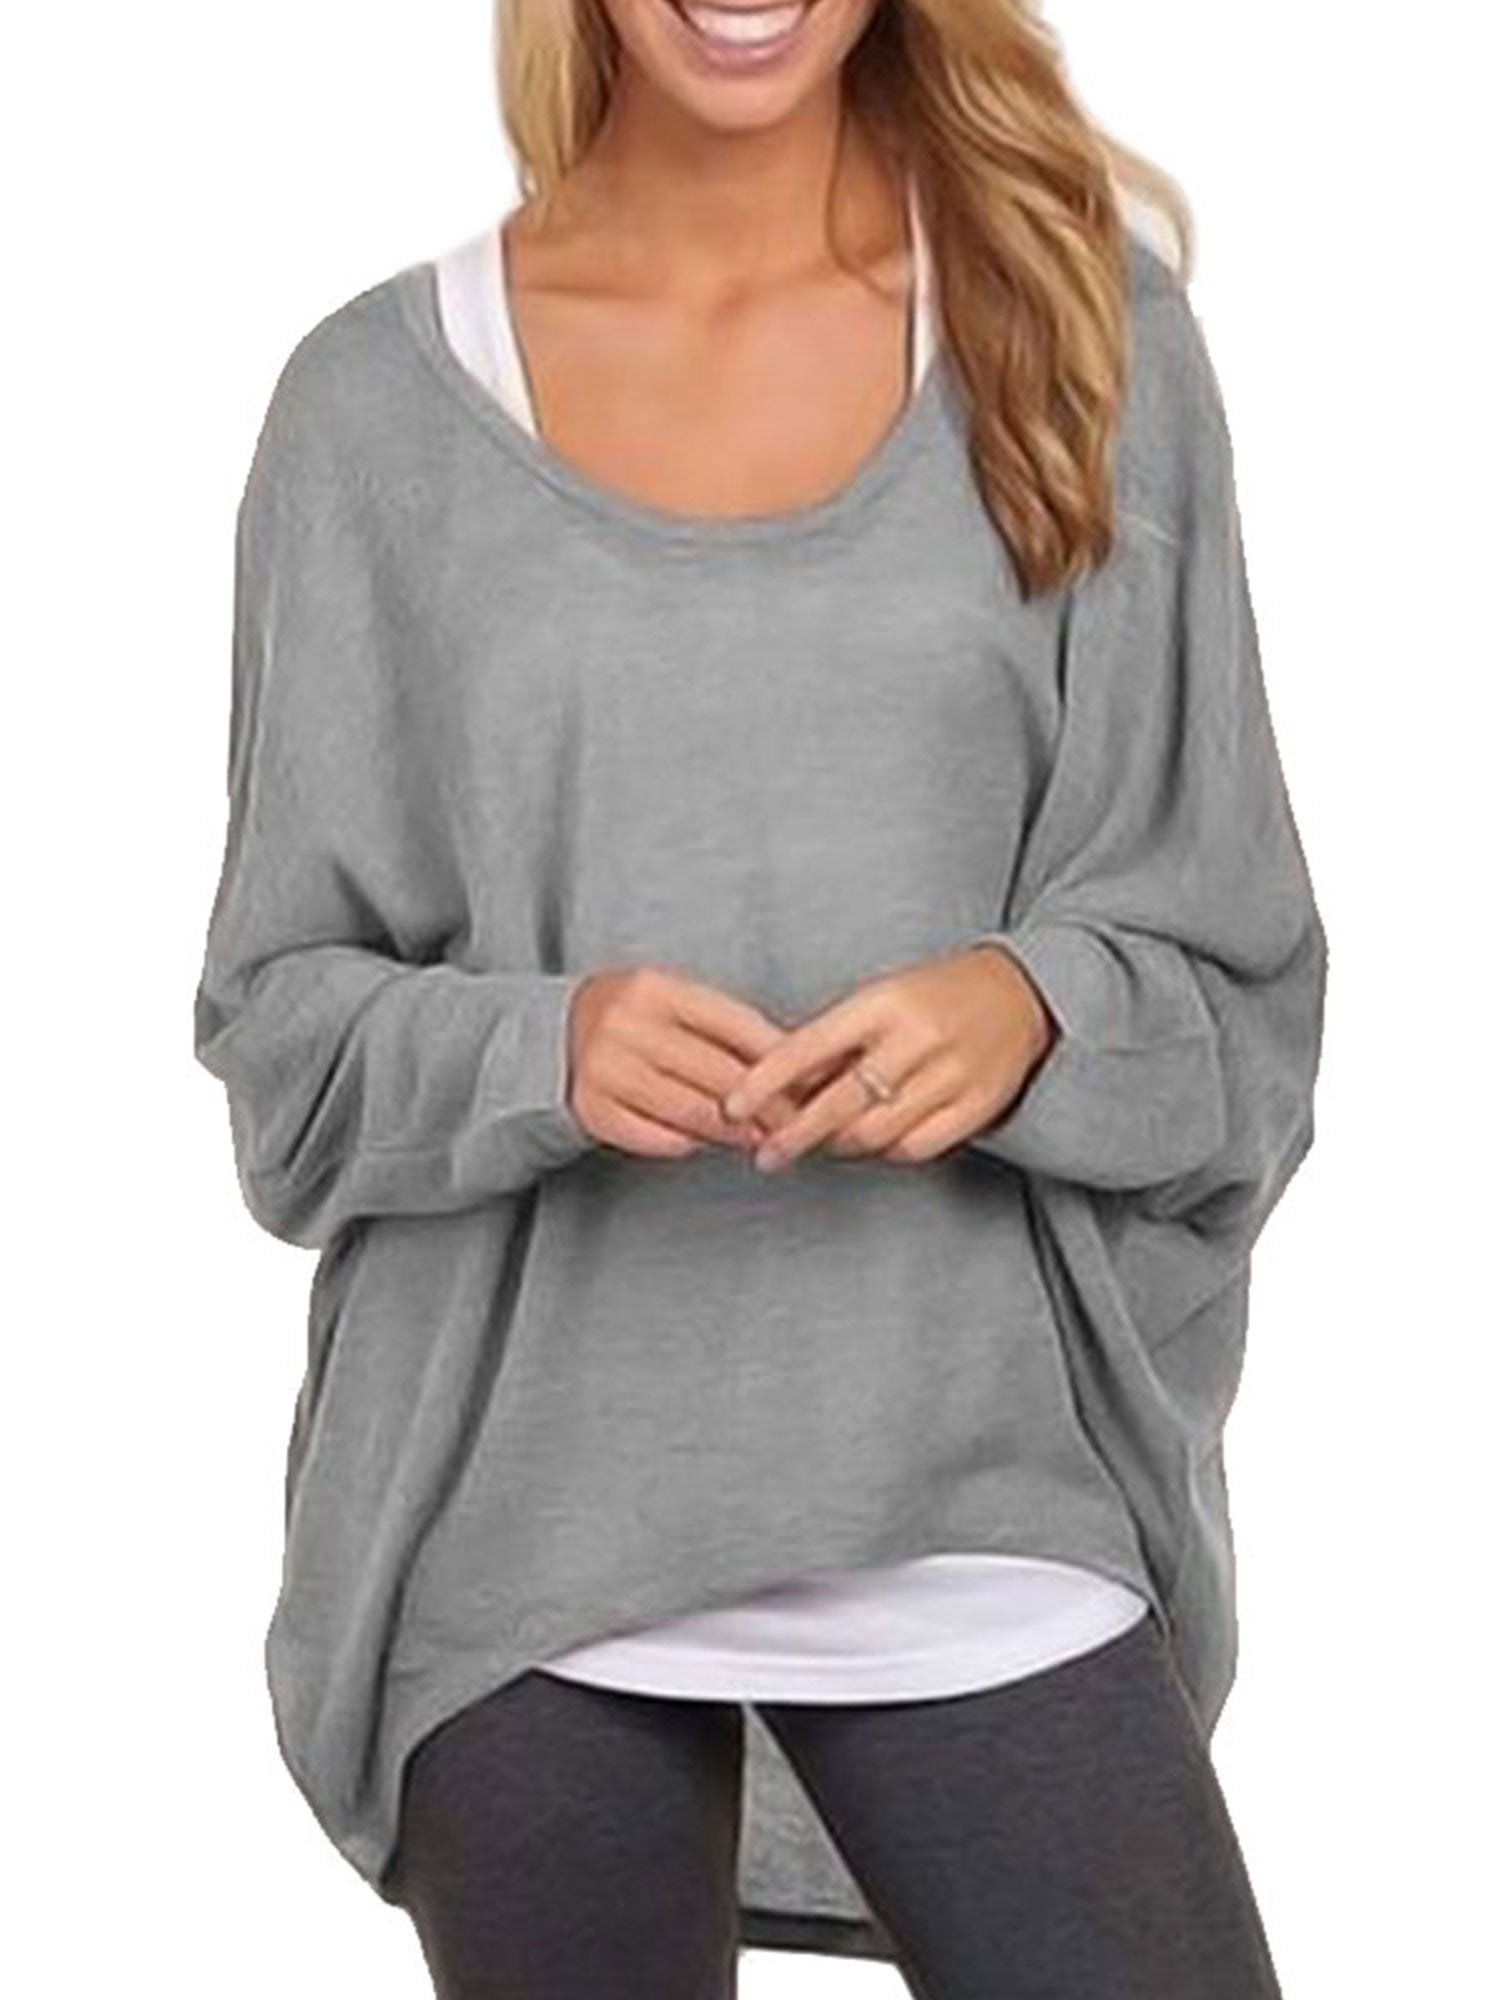 Lazzboy Sweater Womens Puff Long Sleeve Shirt Knitted Casual Solid Loose V Neck Oversize Baggy Plus Size Pullover Slouch Tops